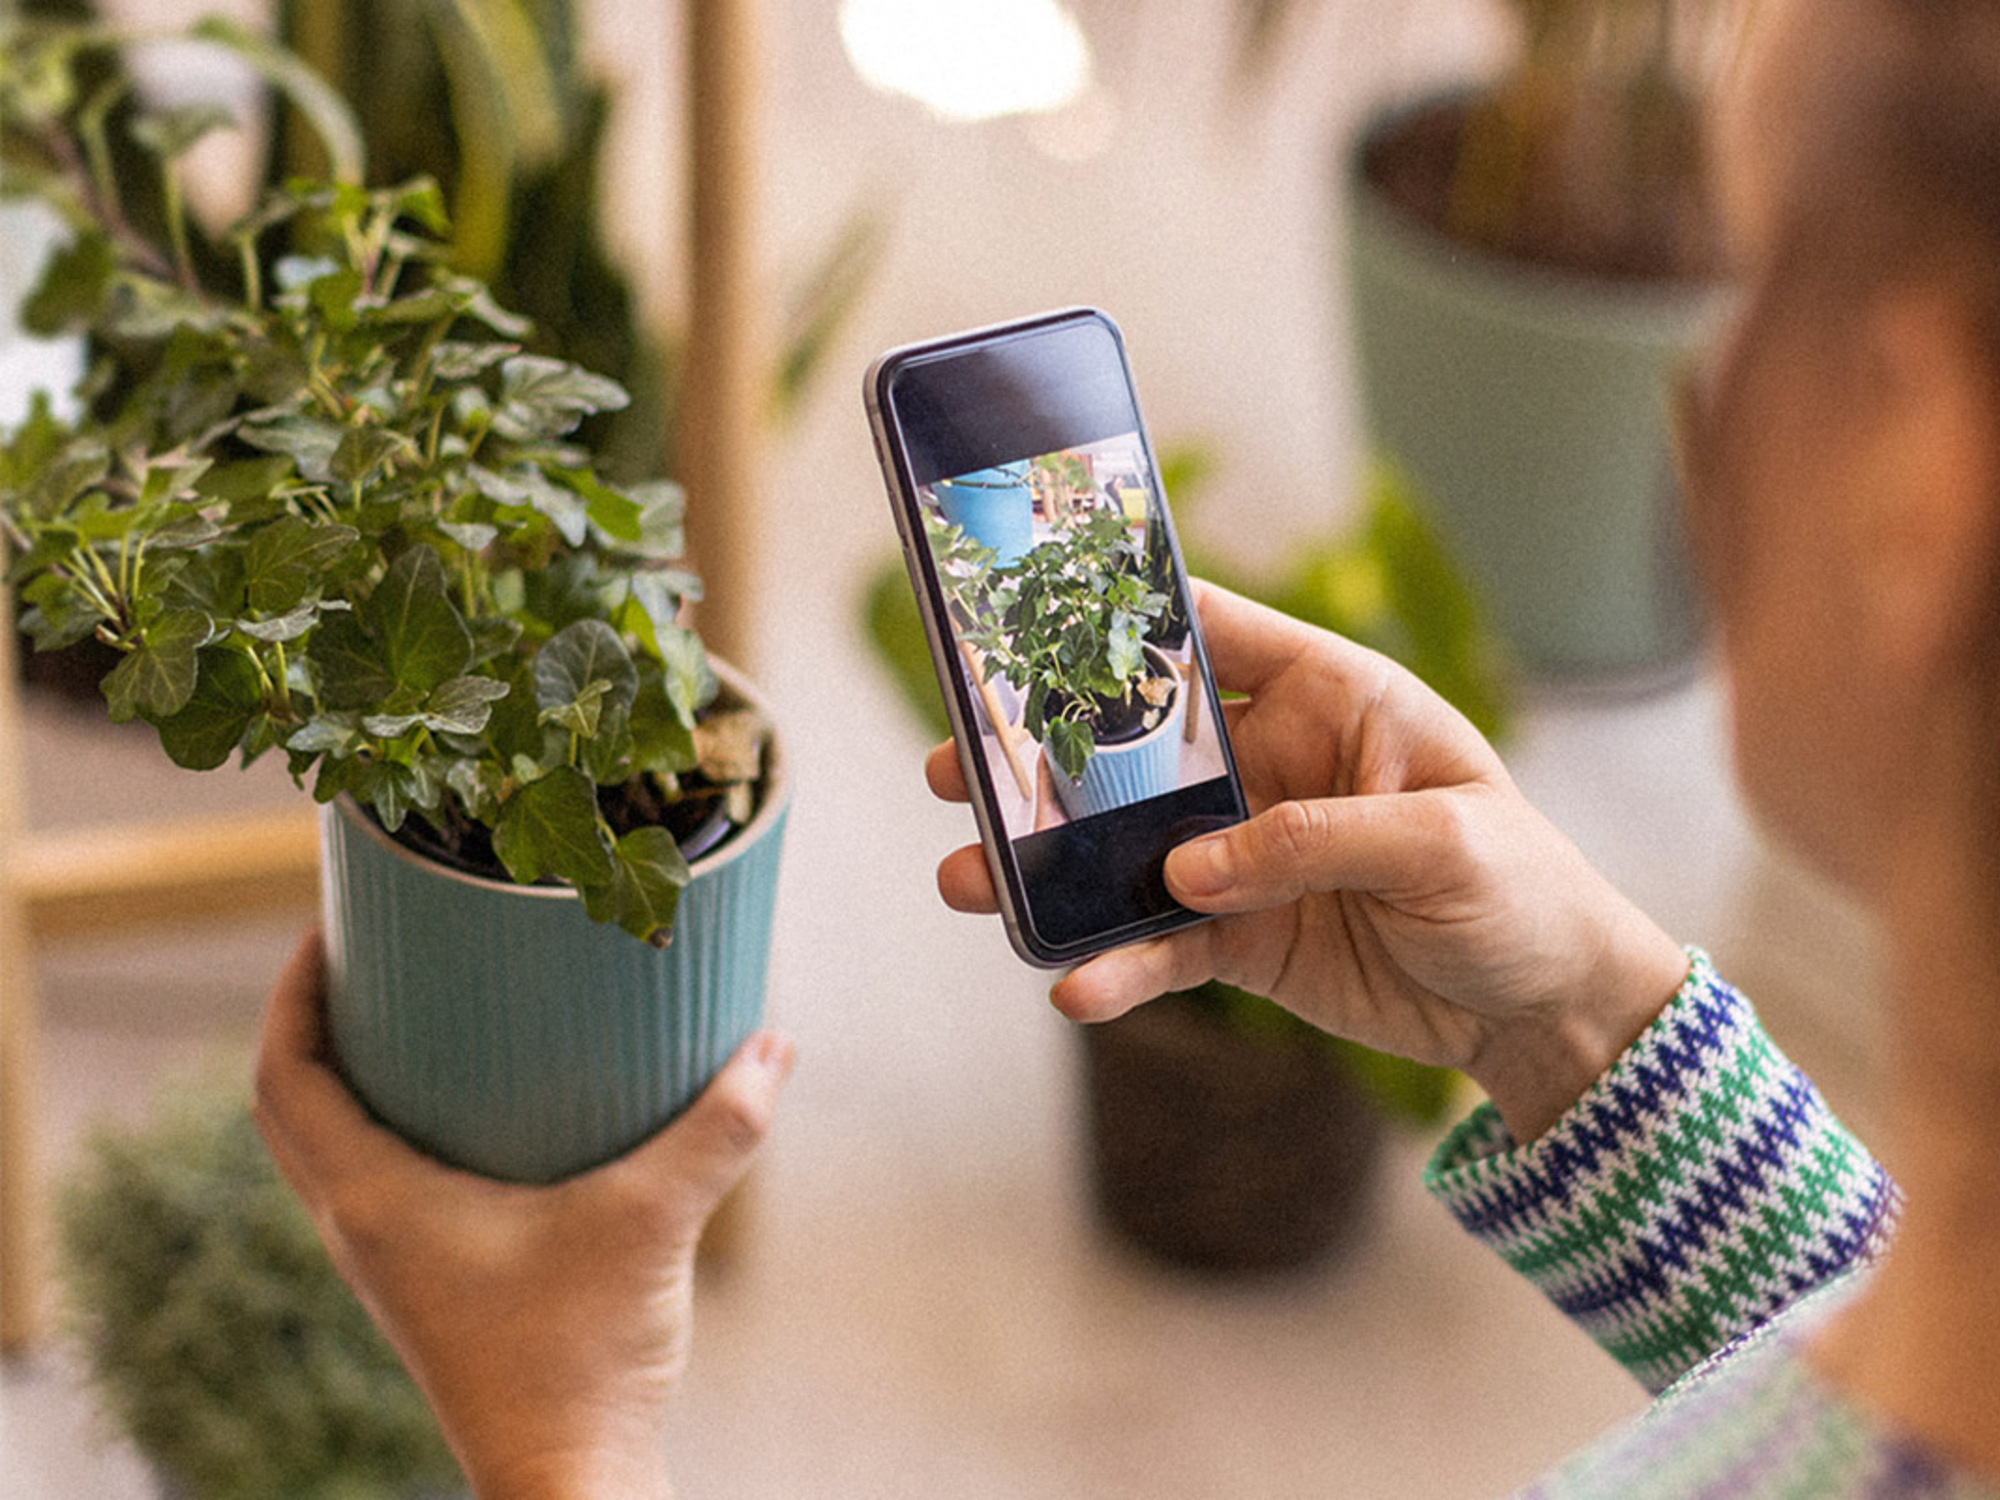 Become a better plant parent with this plant identification and care app